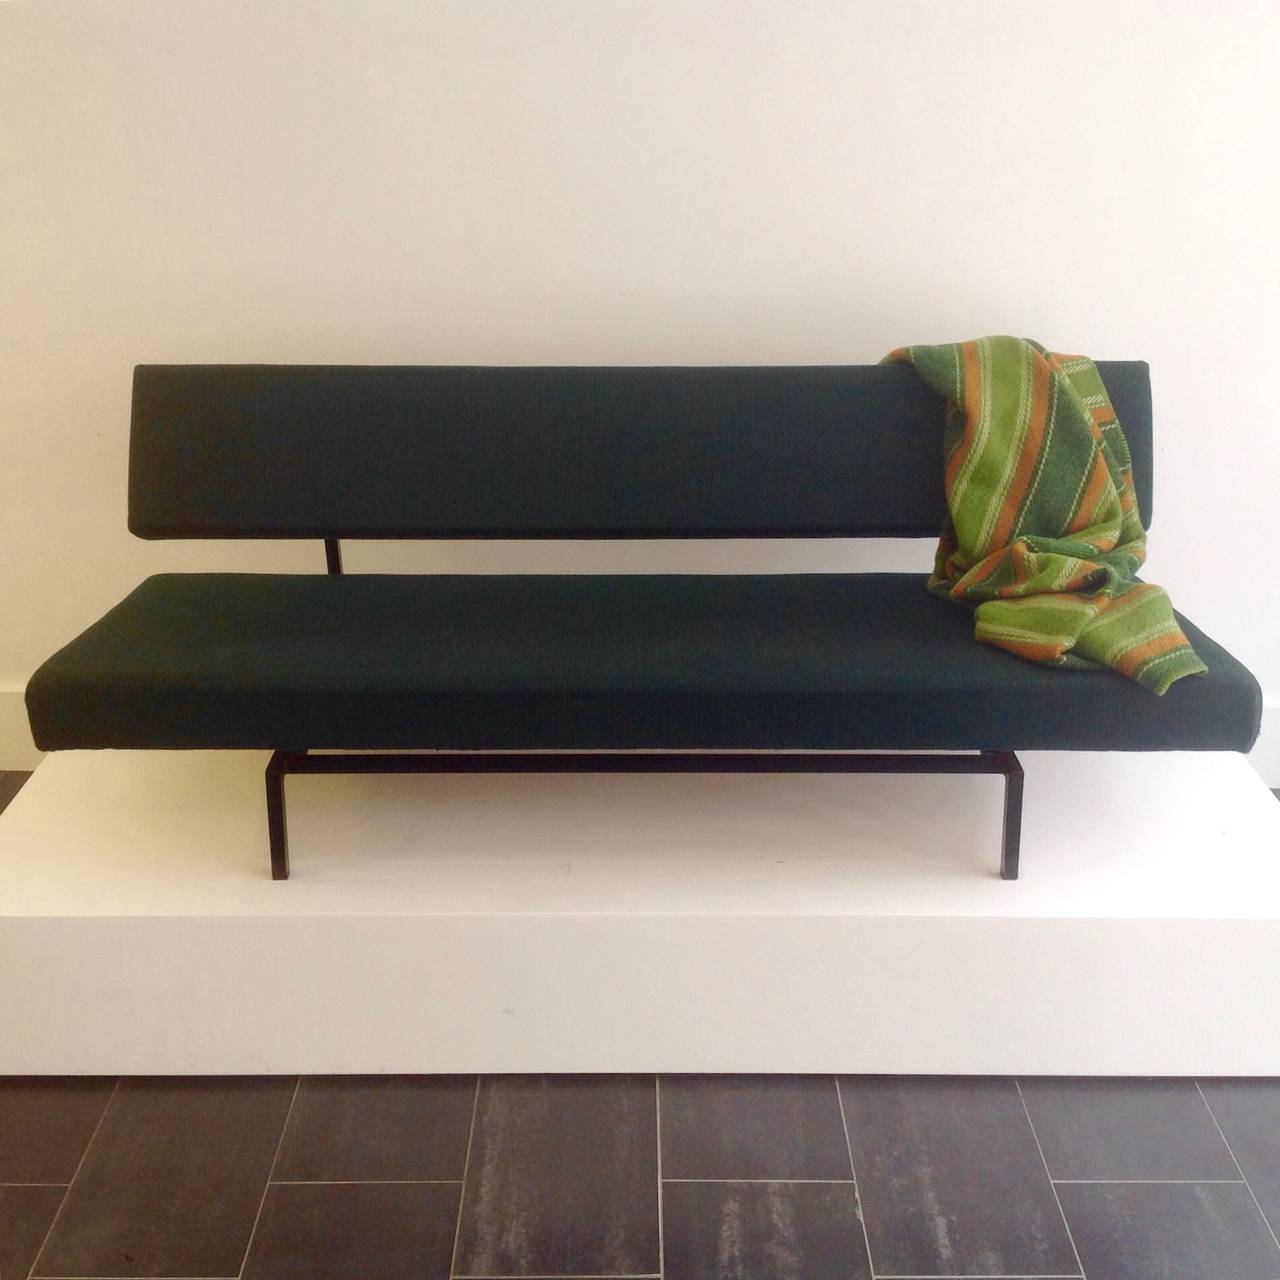 Exceptionally rare in original upholstery and still in very good condition, has just replaced a new seat foam.
Beautiful color, deep green with small black stripes (see last picture).
The sleeping sofa is a very practical space saving solution for